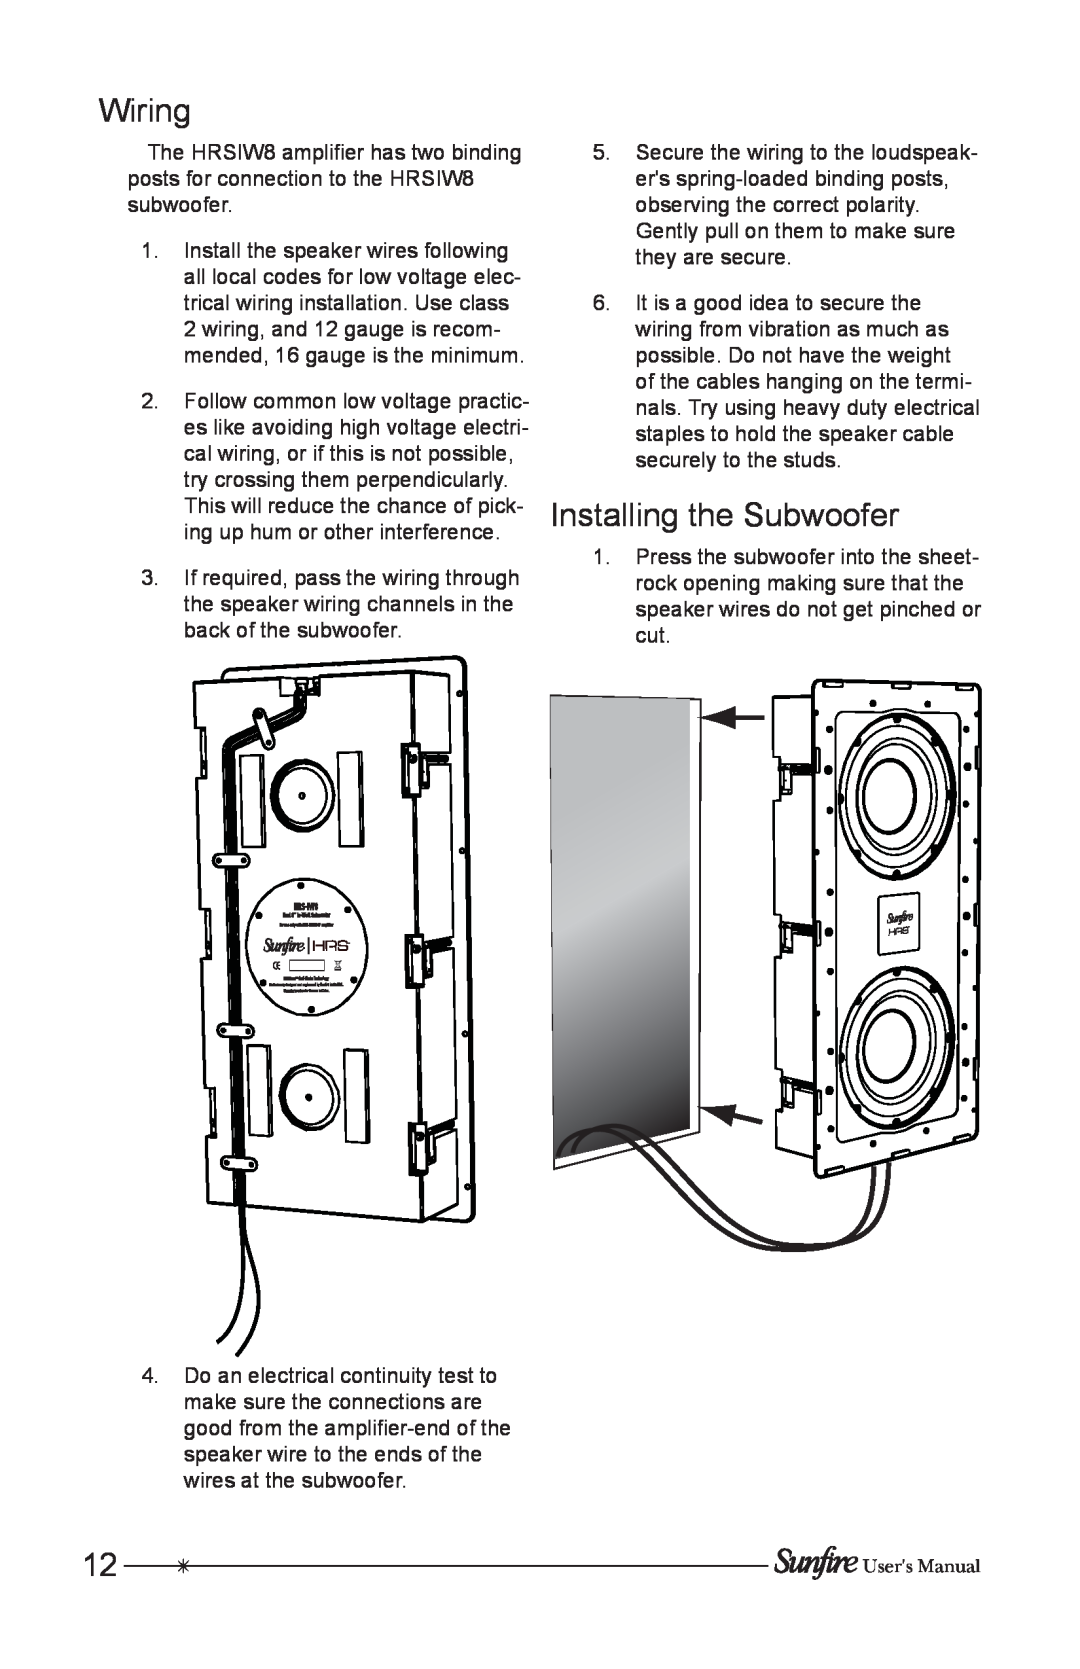 Sunfire HRSIW8 user manual Wiring, Installing the Subwoofer 